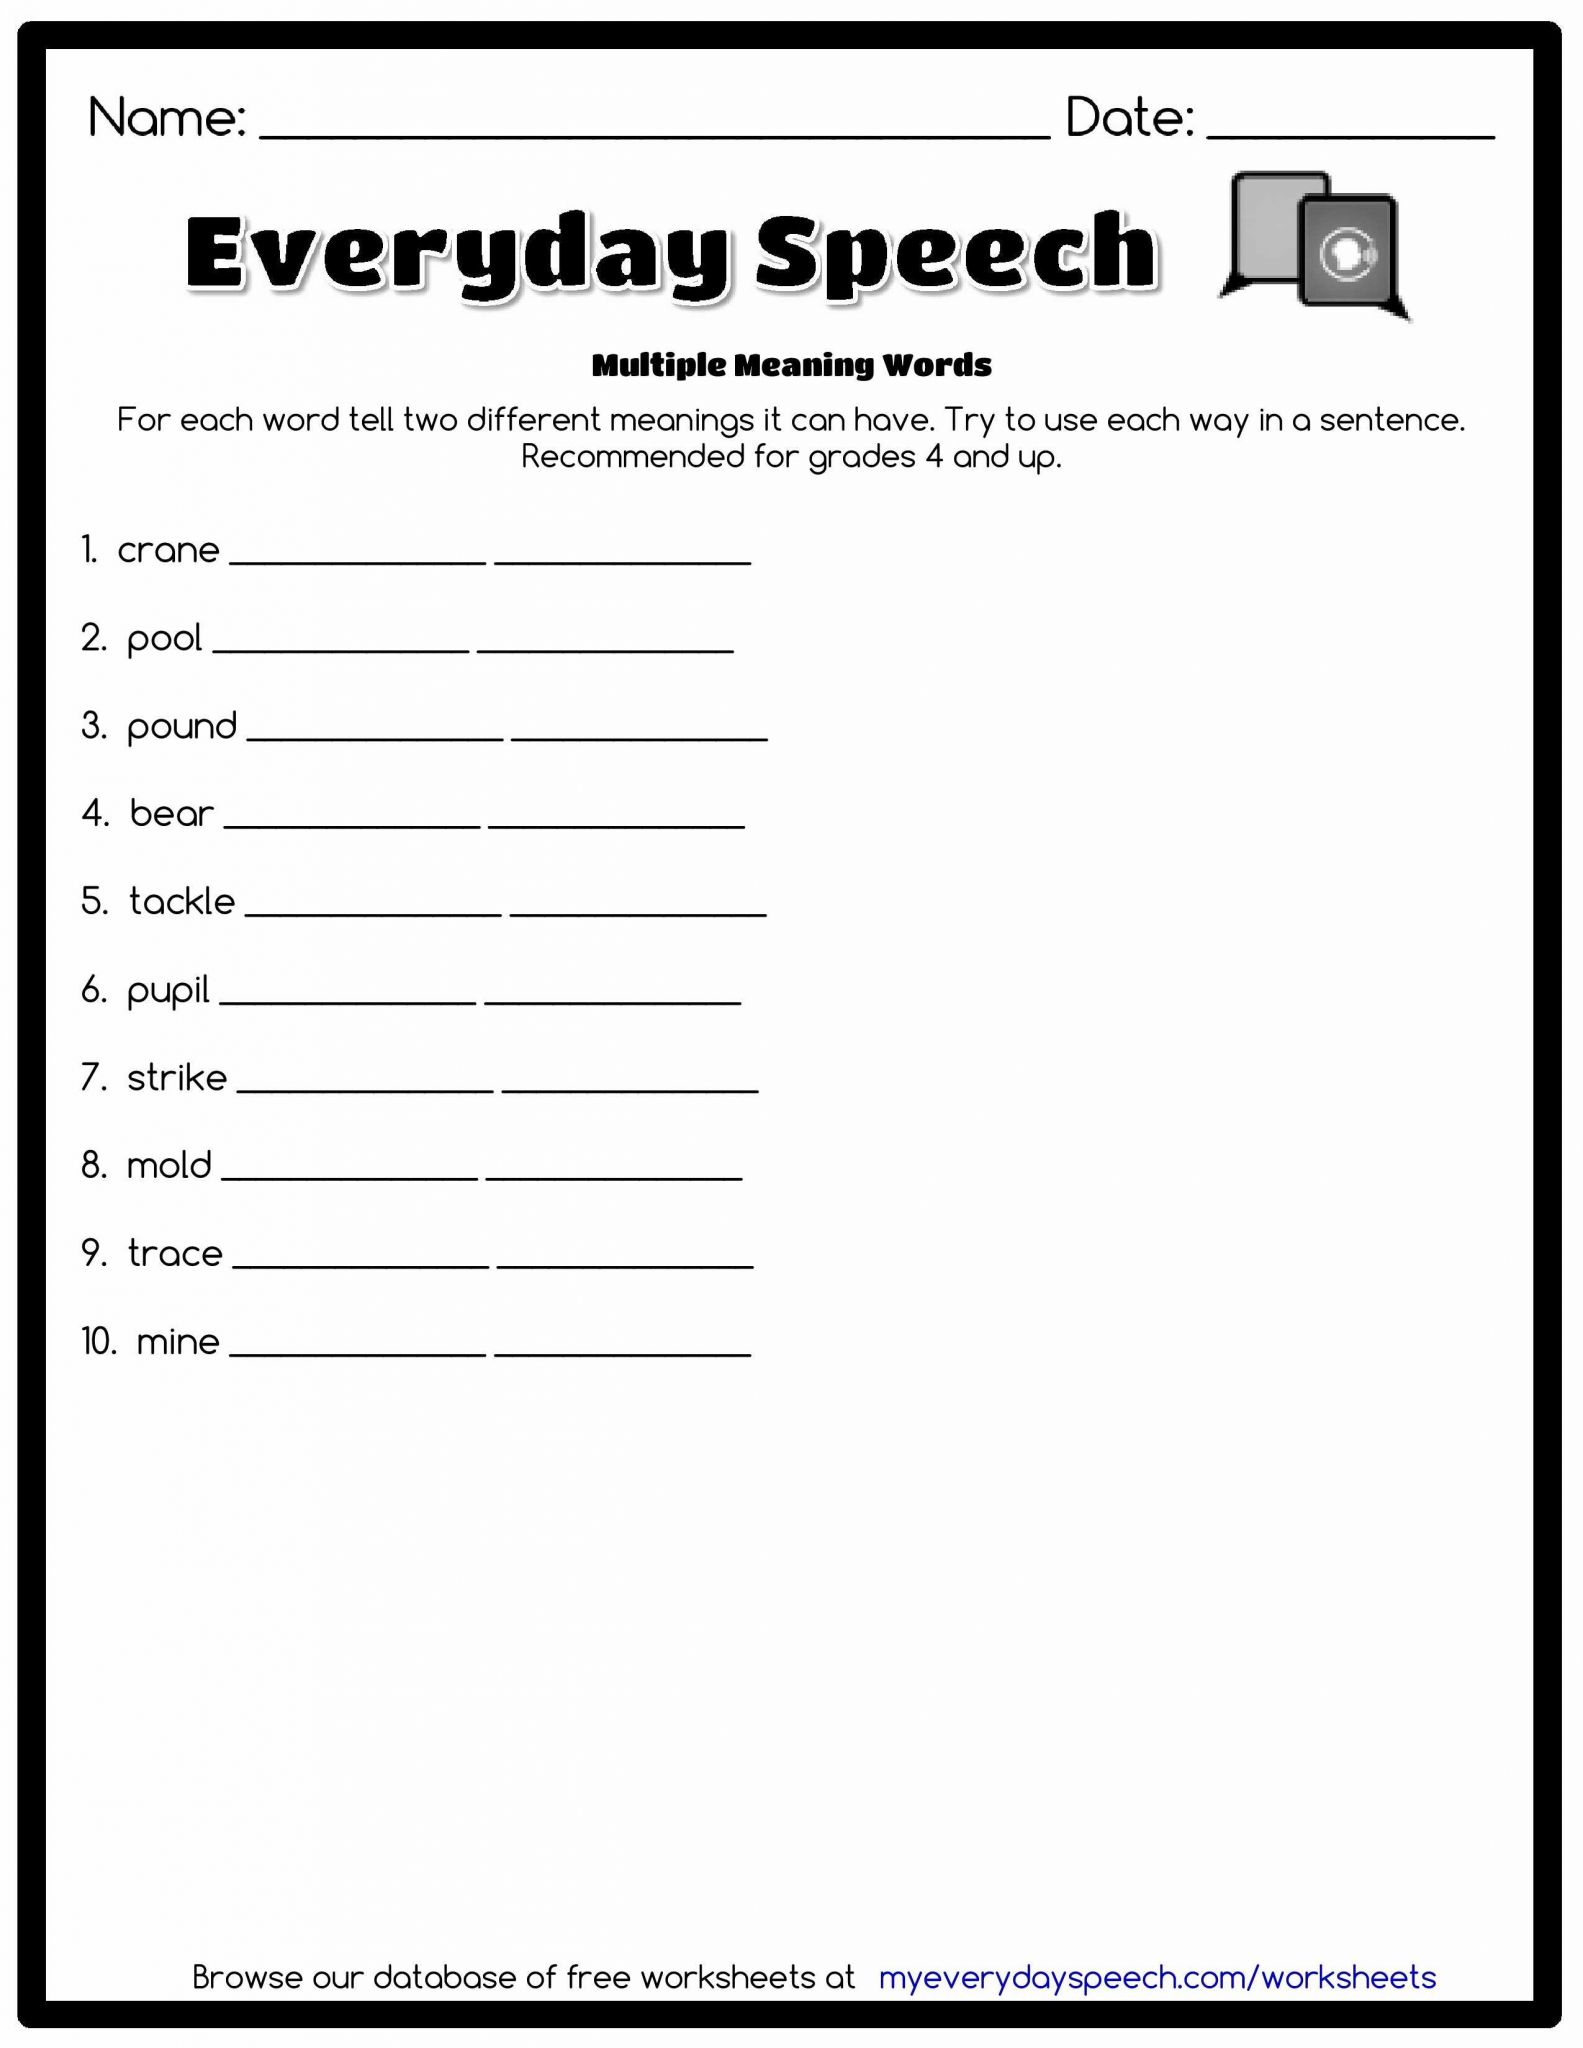 Spanish Present Subjunctive Worksheet Pdf as Well as Monly Confused Words Worksheet Answers Image Collections